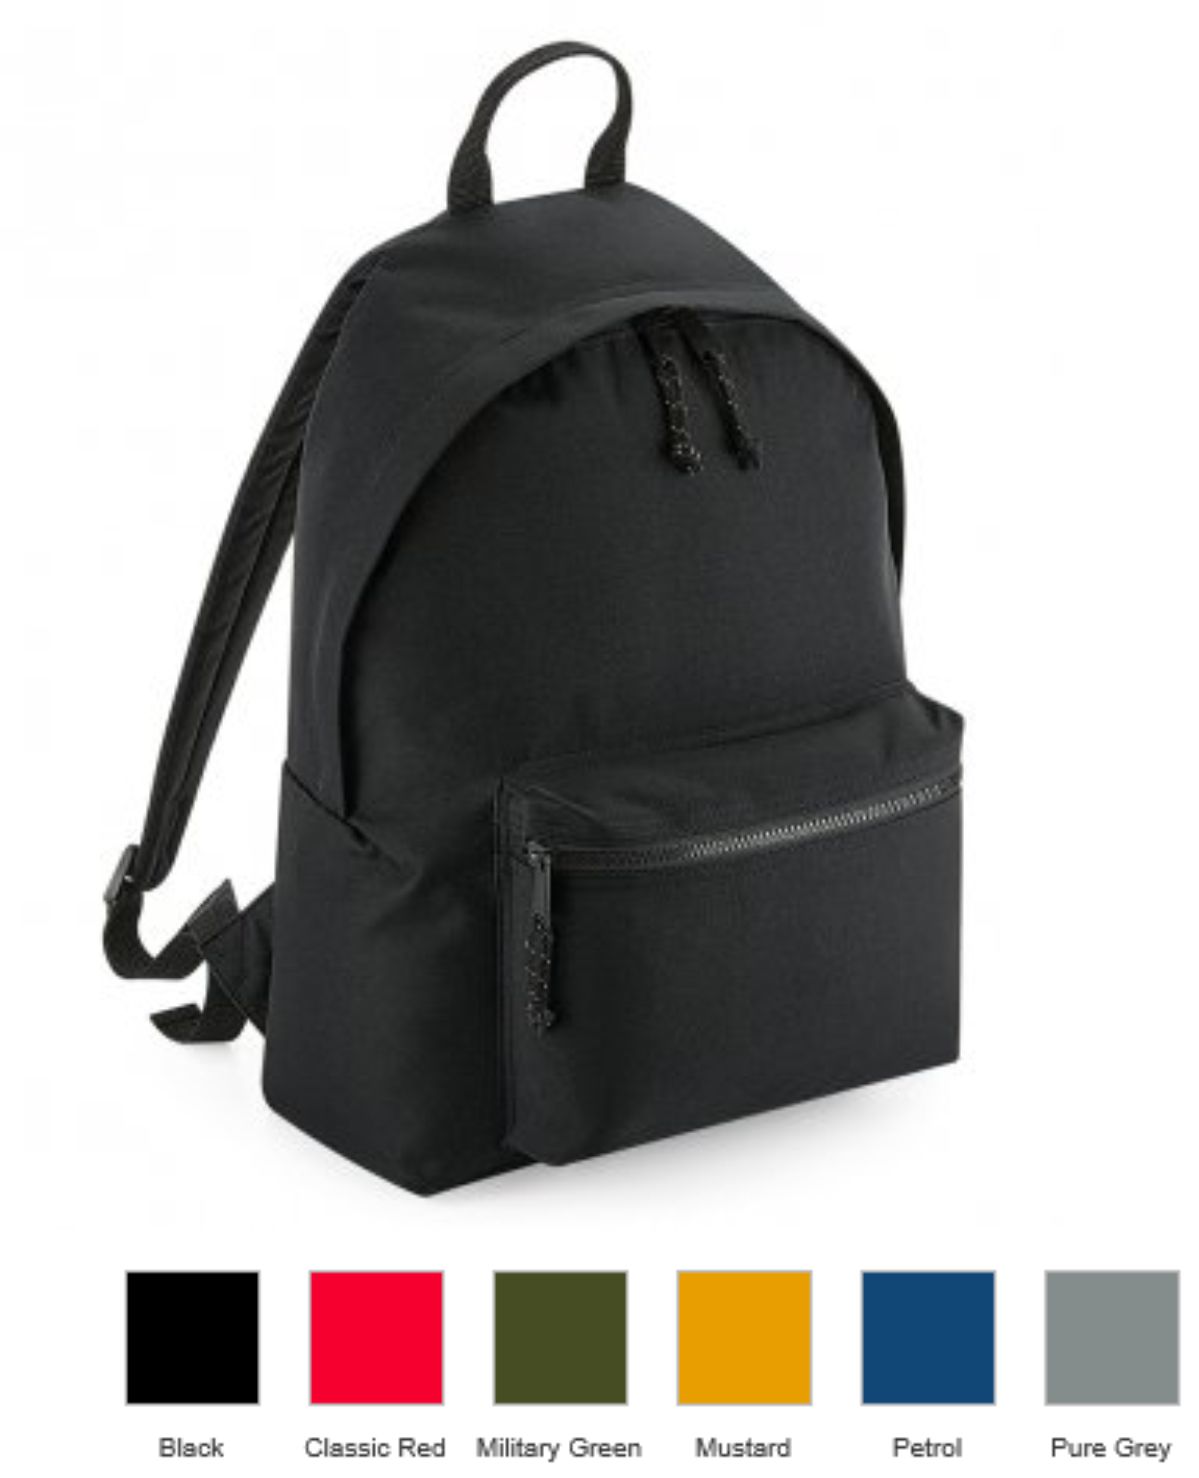 BG285 Bagbase Renew Recycled Backpack - Click Image to Close